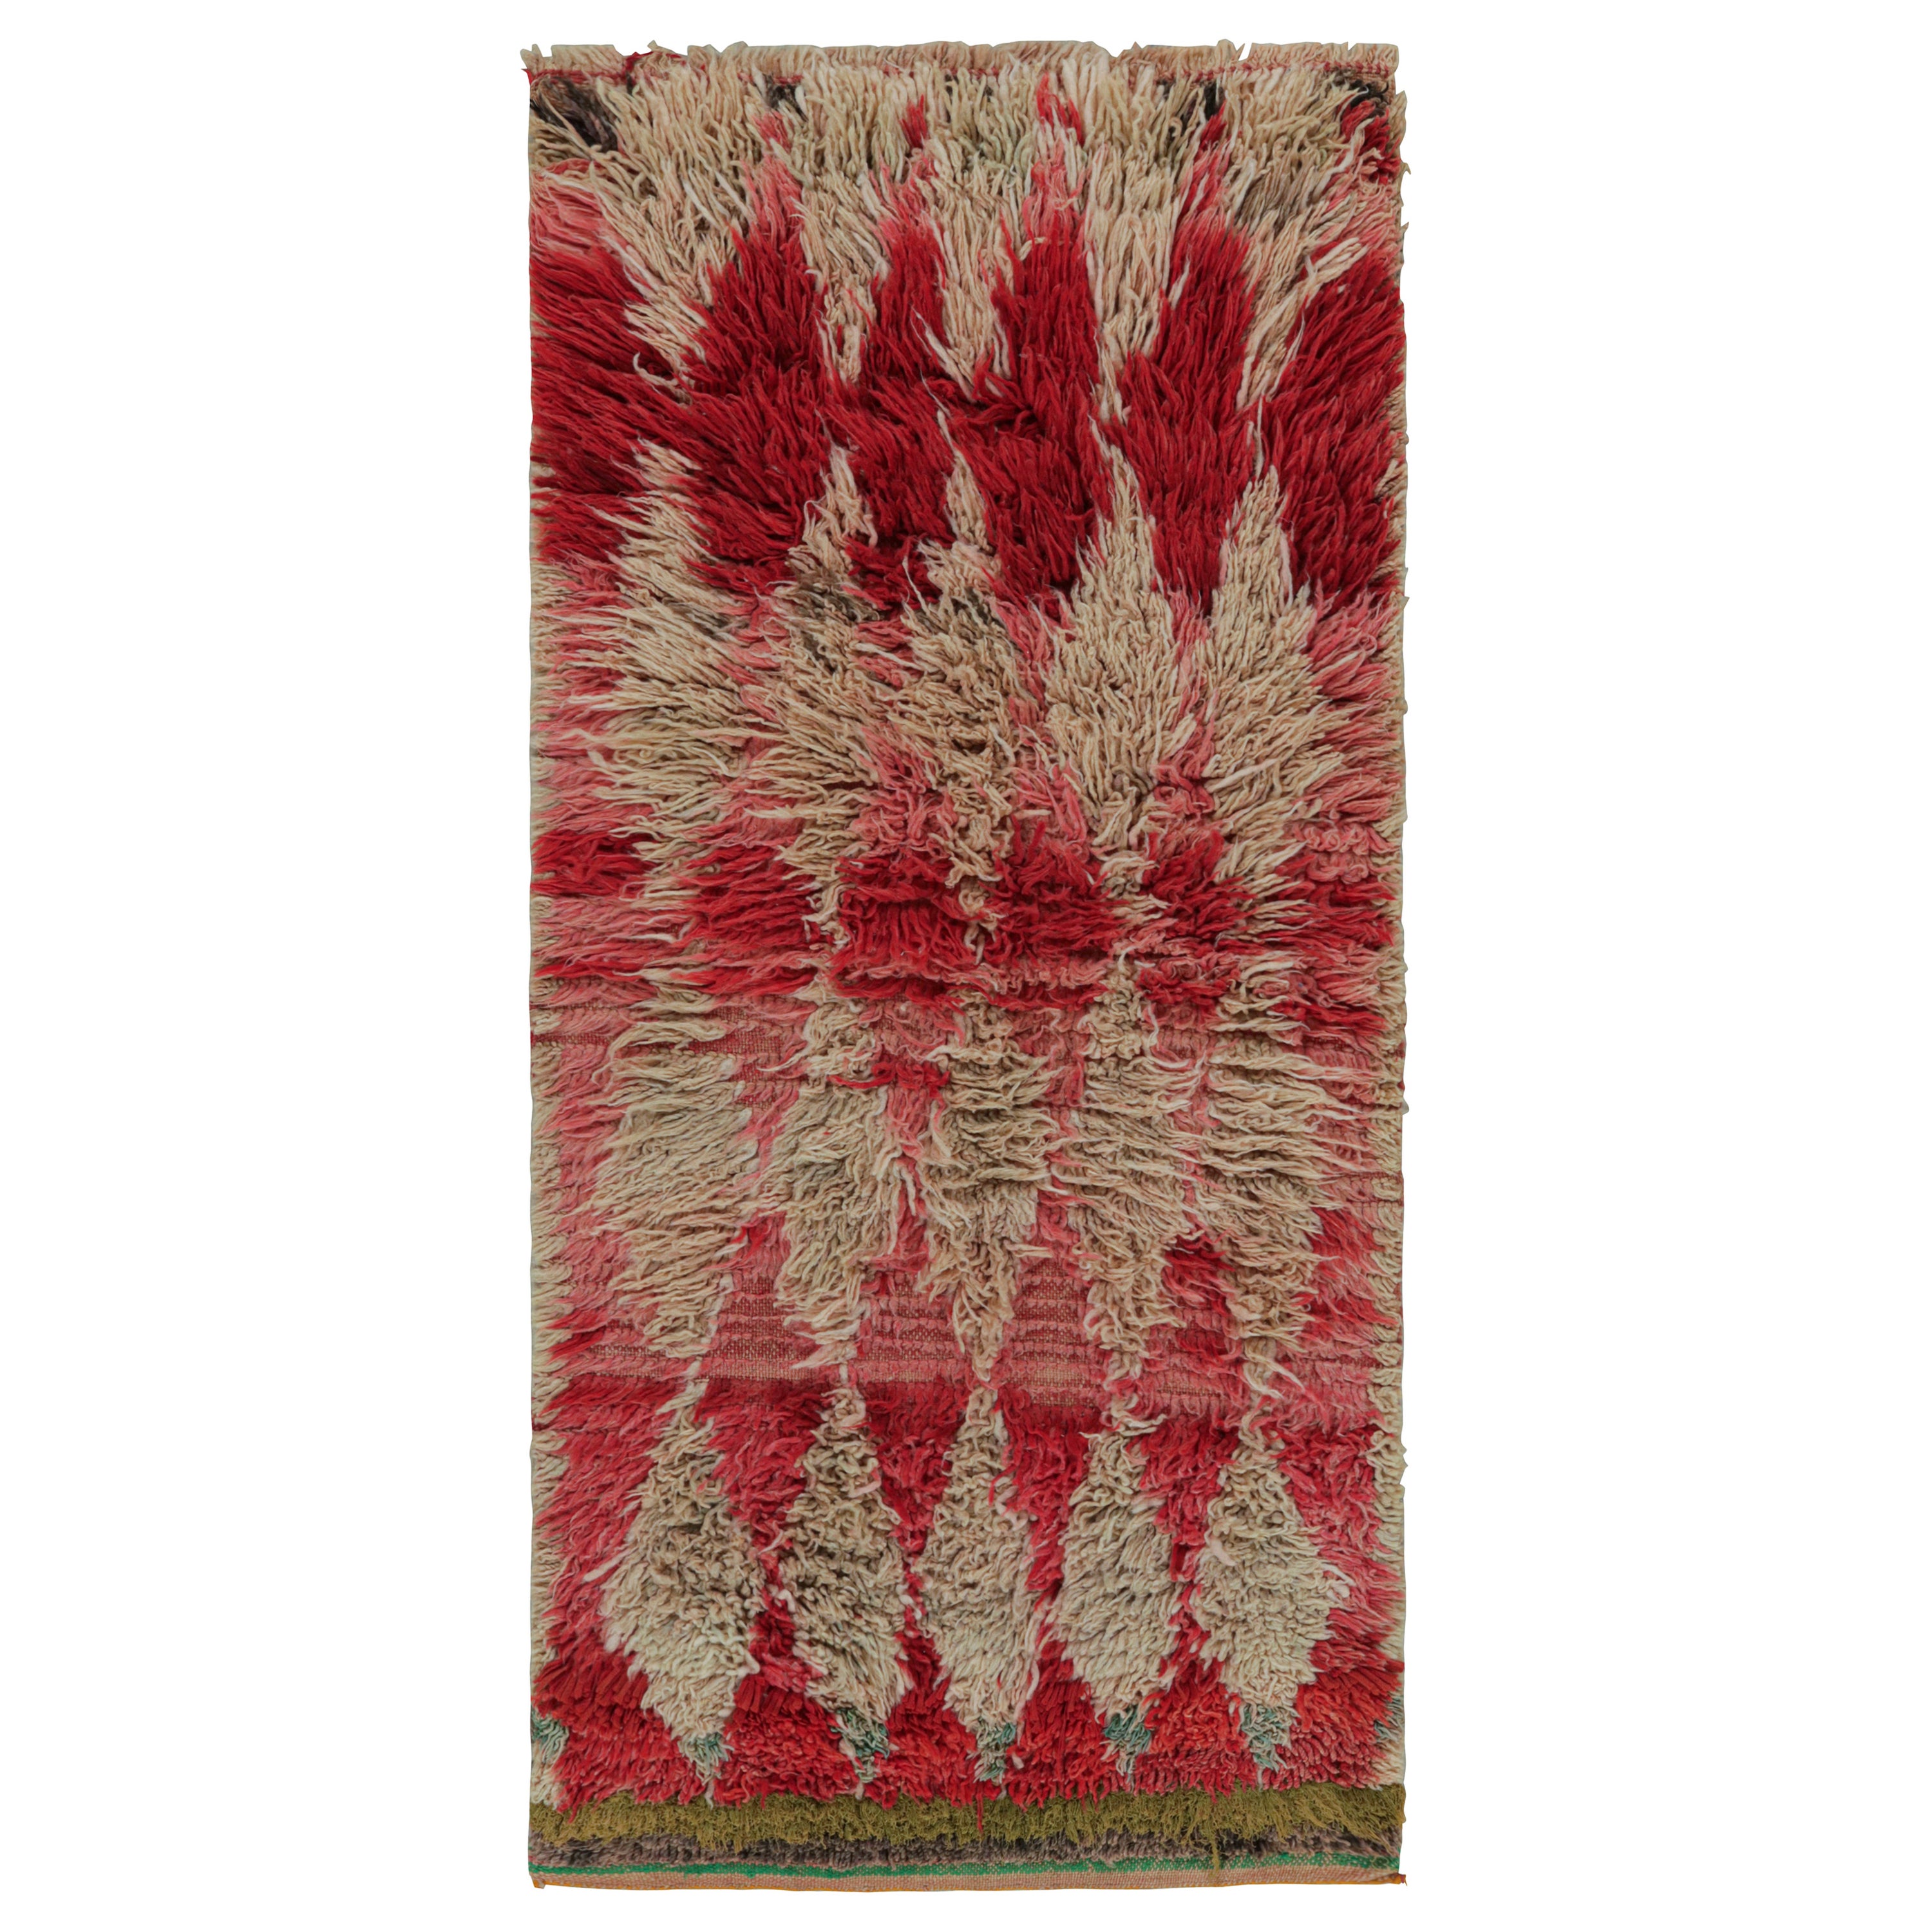 Vintage Azilal Moroccan Runner Rug, with Lozenge Patterns from Rug & Kilim For Sale